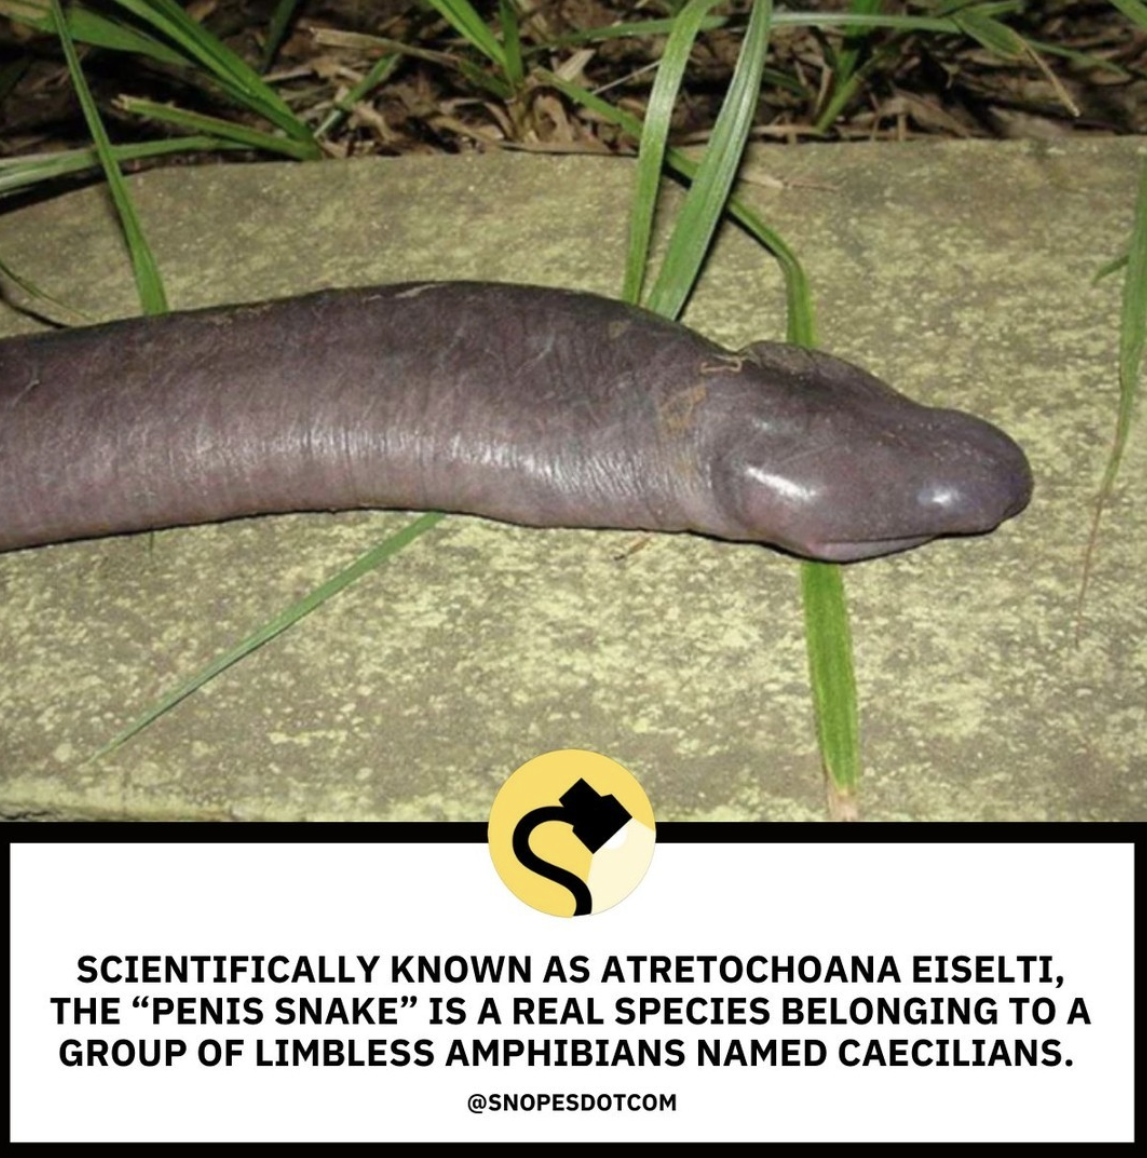 Snopes Facts - atretochoana eiselti - Scientifically Known As Atretochoana Eiselti, The "Penis Snake" Is A Real Species Belonging To A Group Of Limbless Amphibians Named Caecilians.